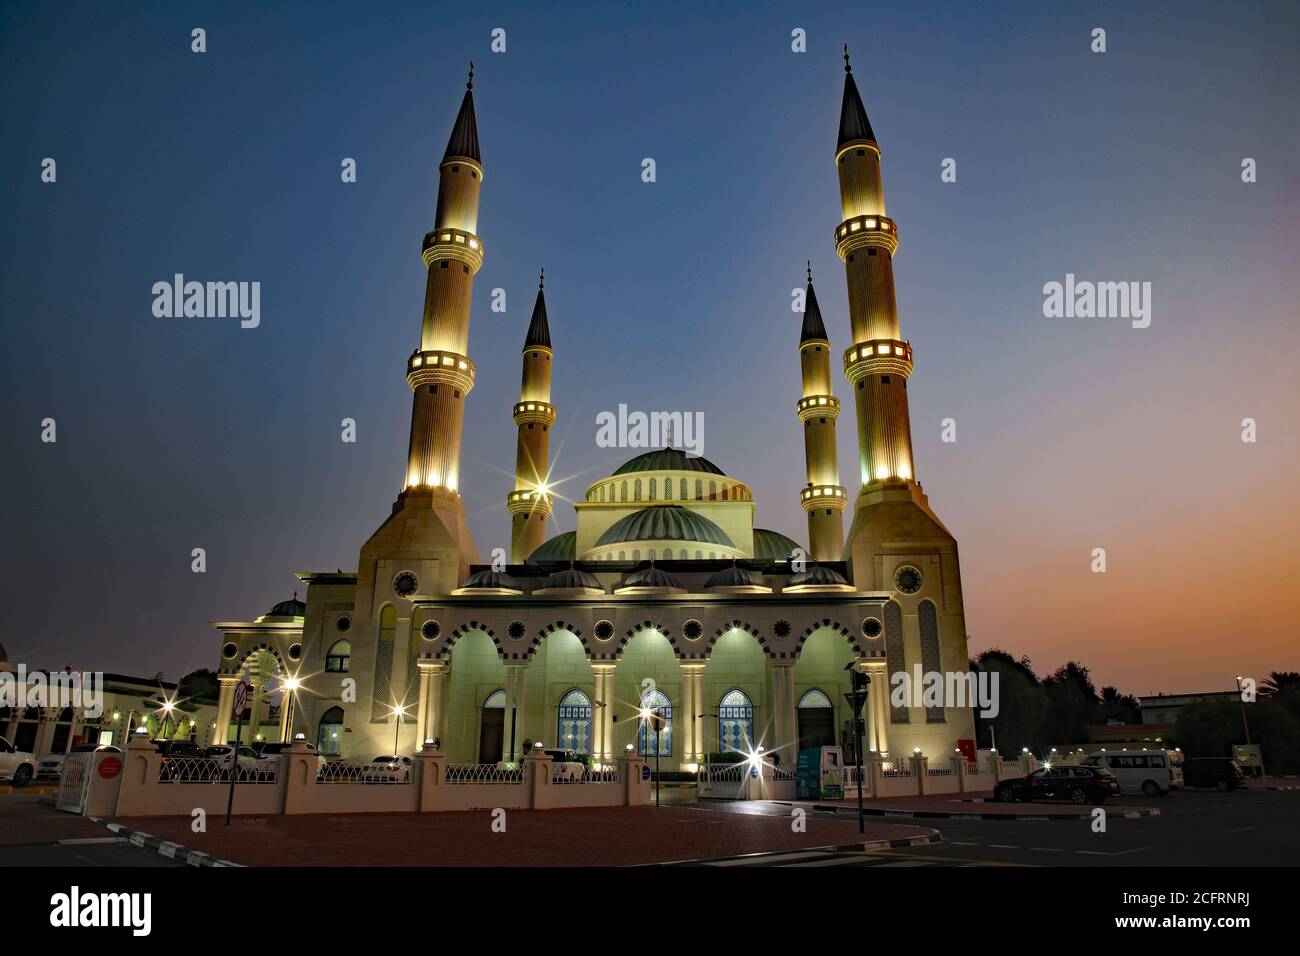 Al farooq mosque hi-res stock photography and images - Alamy